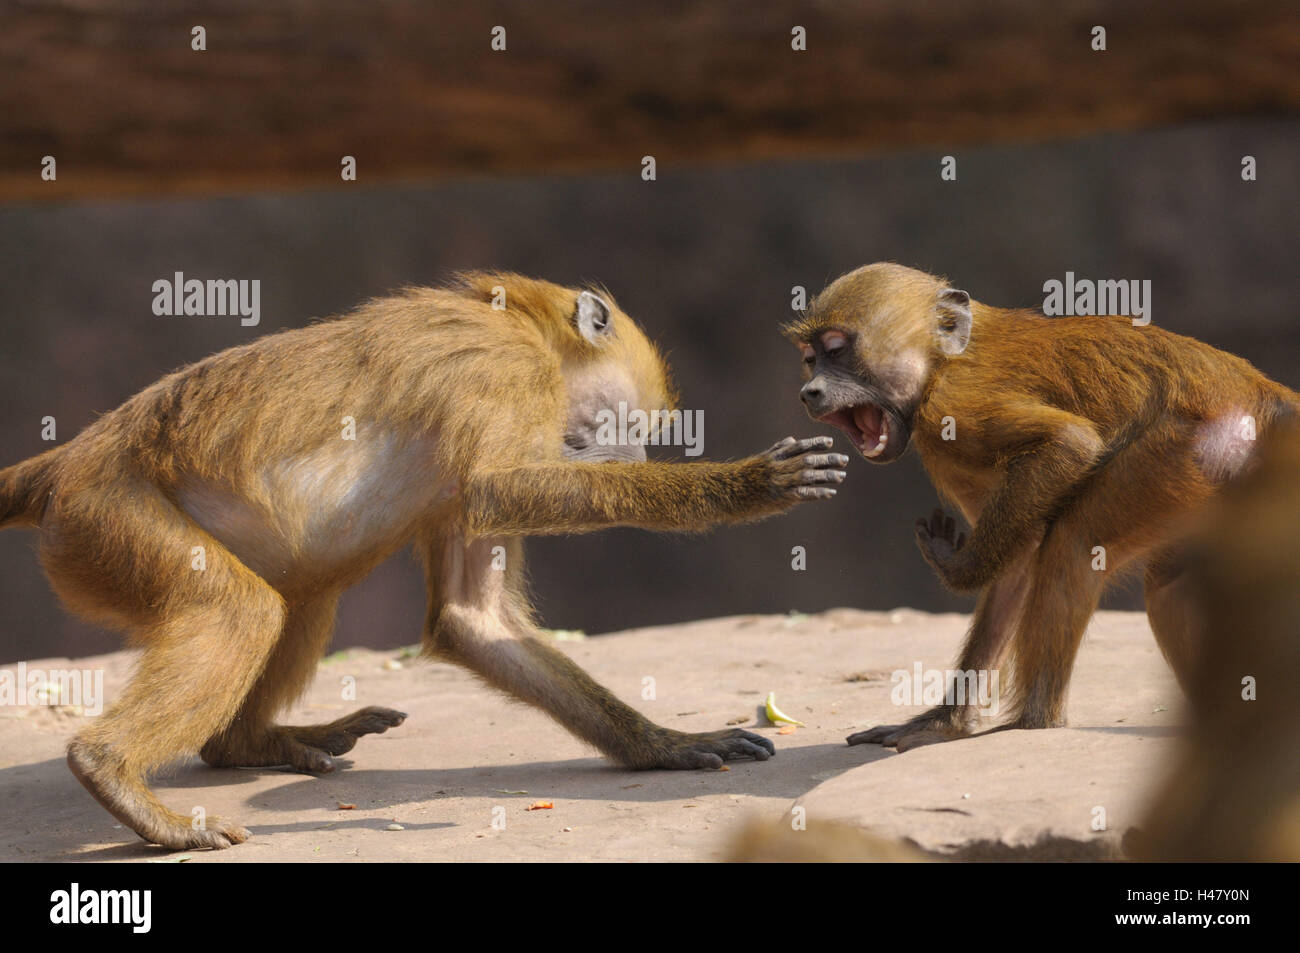 Guinea baboons, Papio papio, young animals, side view, fighting, Stock Photo